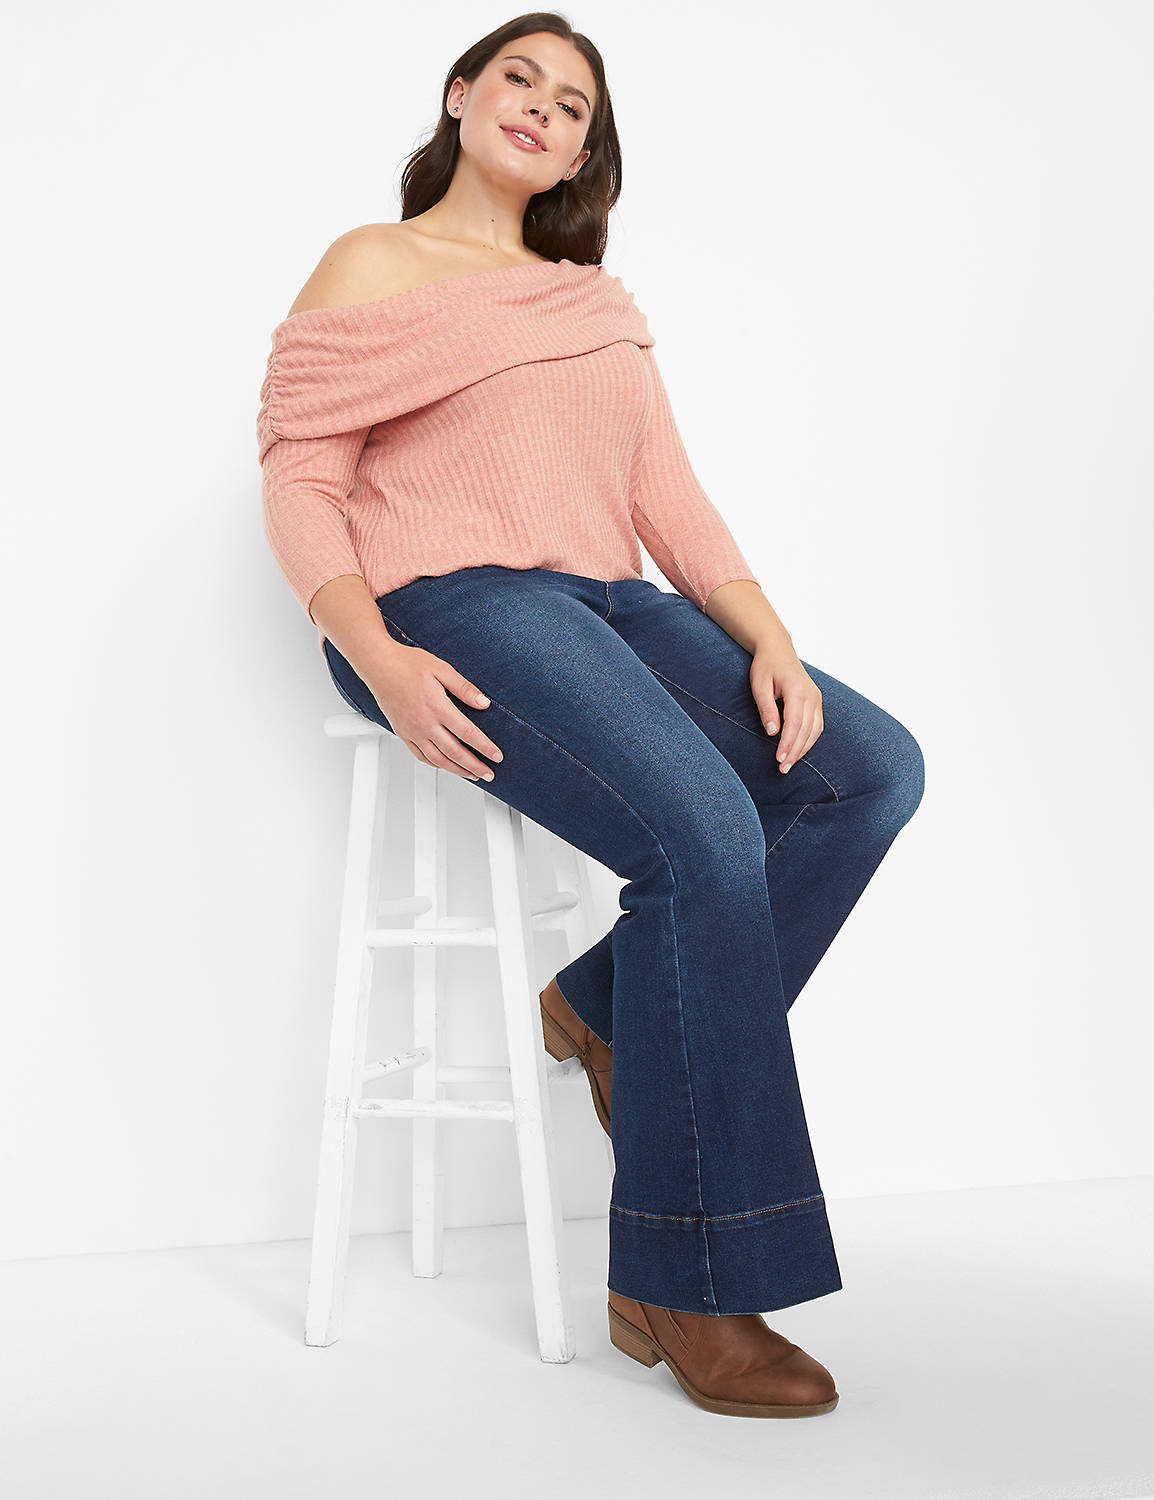 SIGNATURE FIT FLARE JEAN - DOWNTOWN Product Image 3